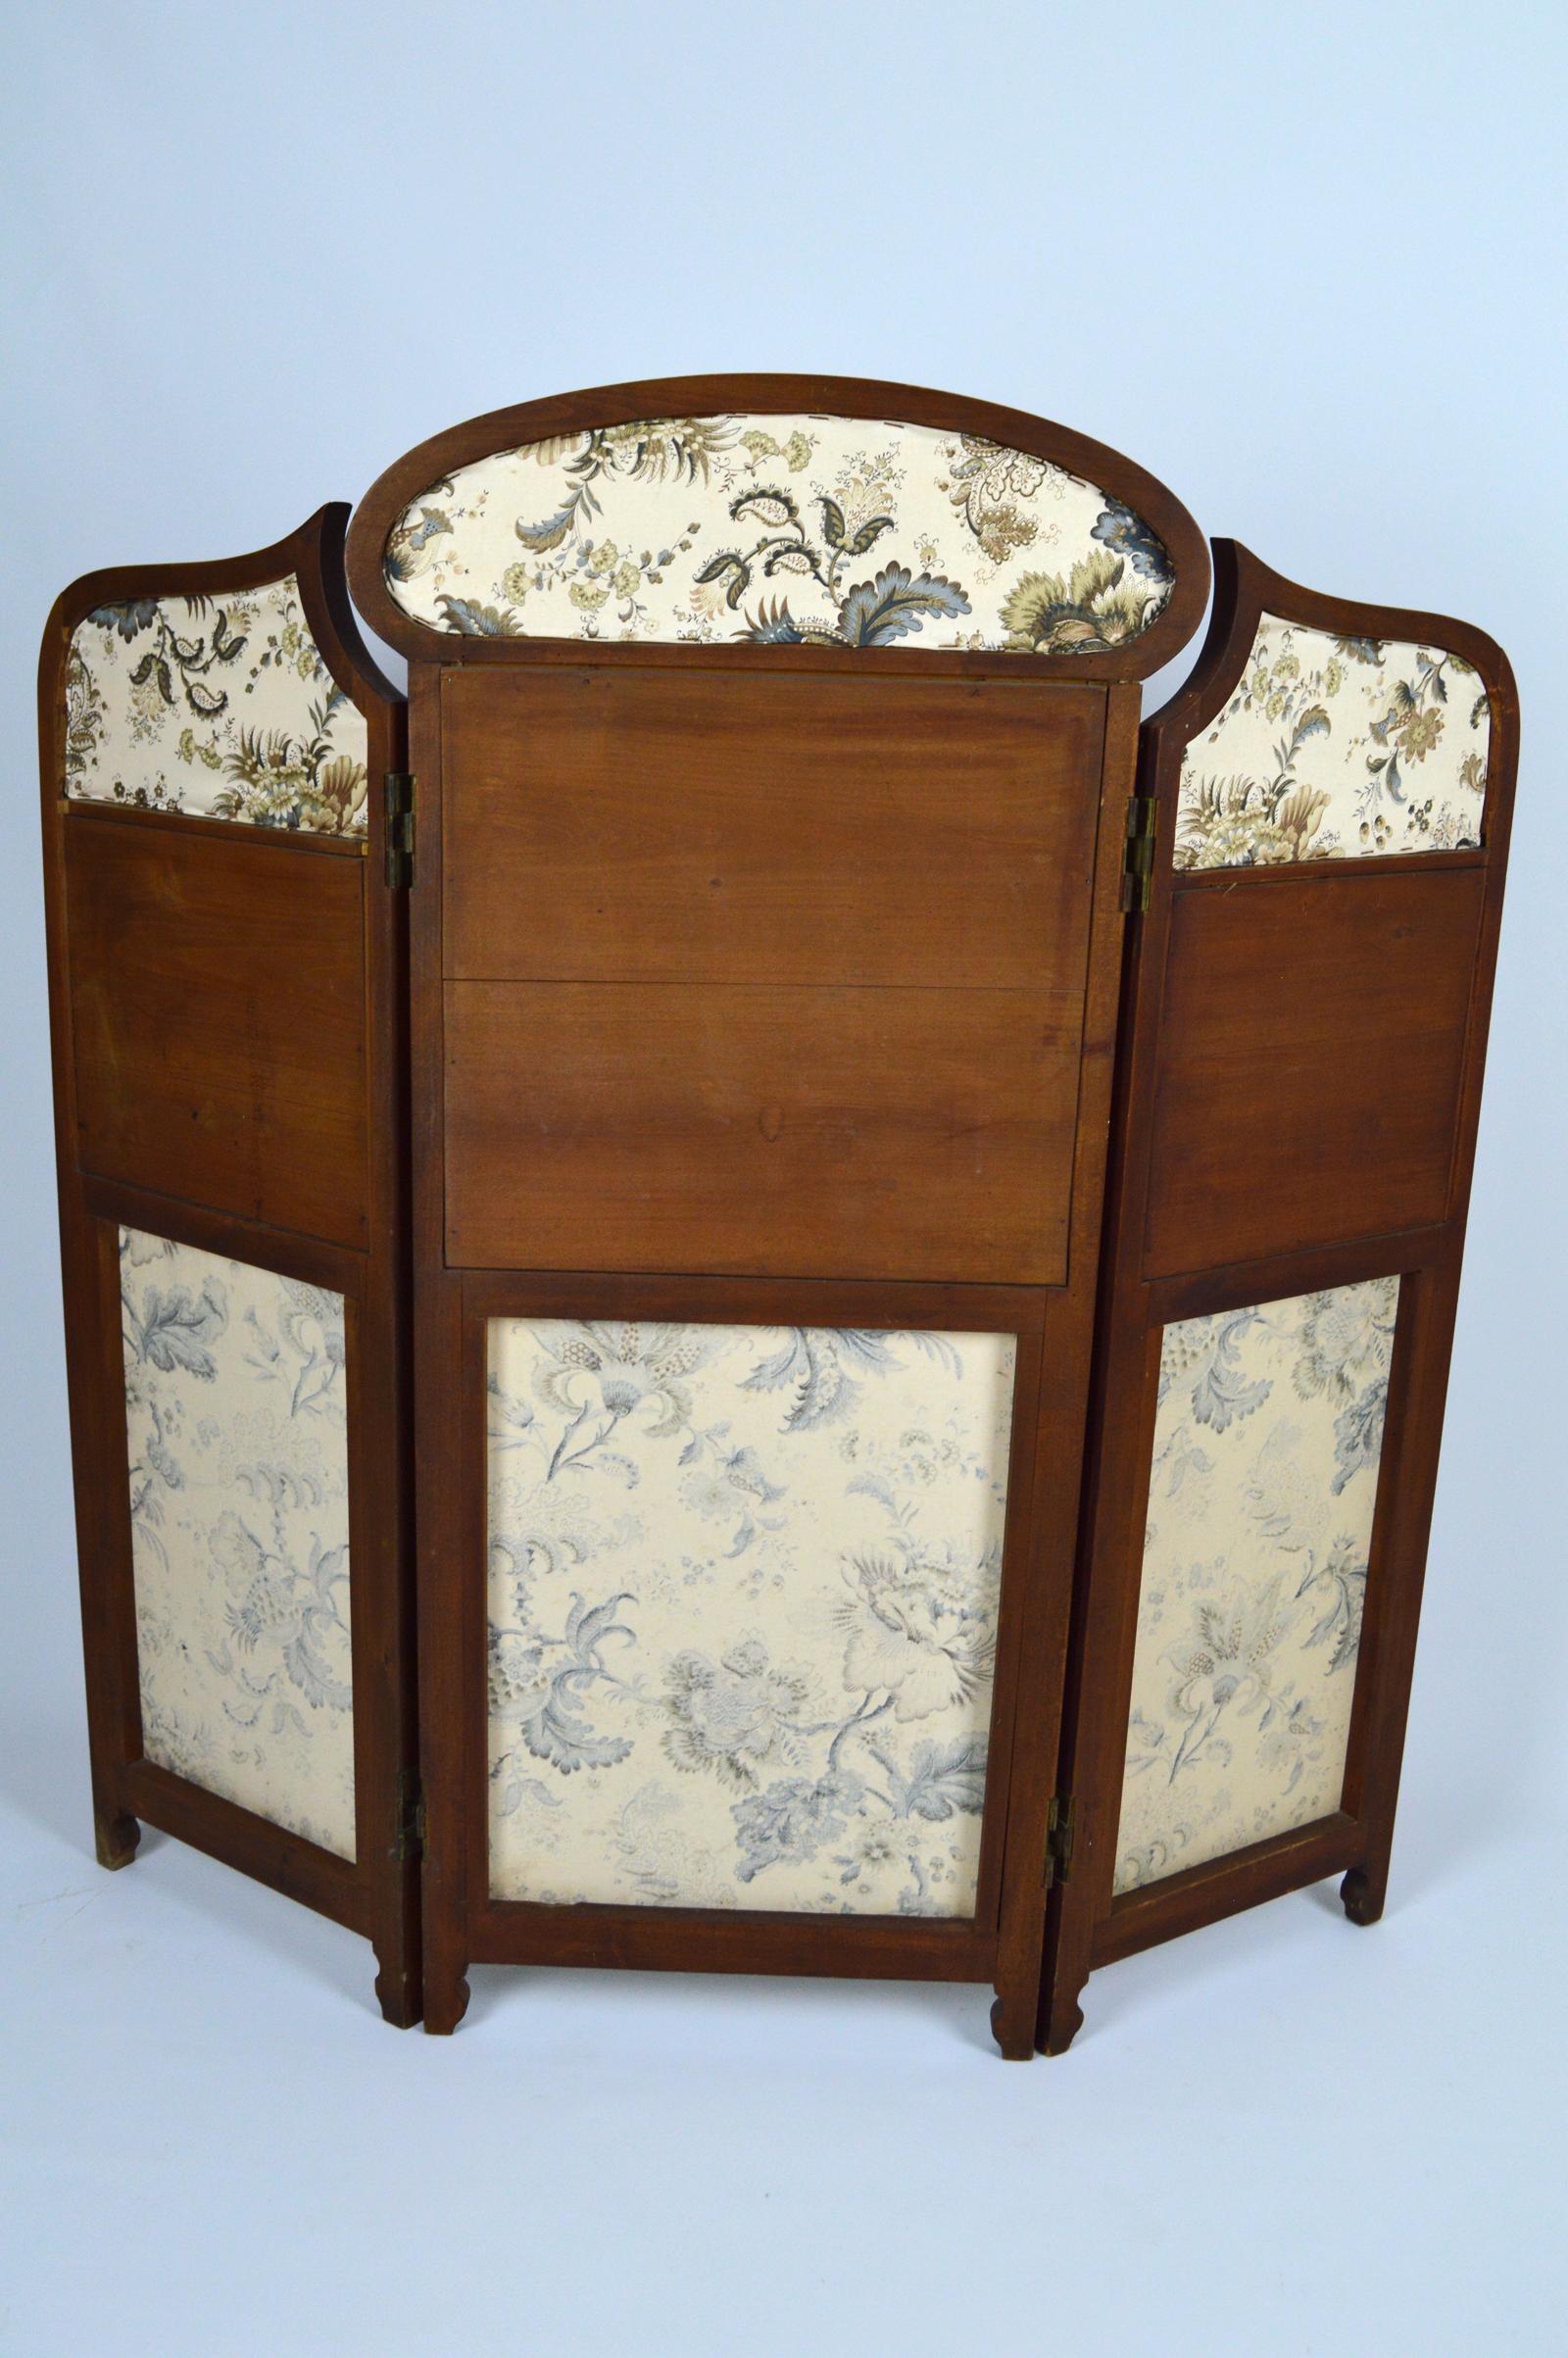 Art Nouveau Three-Panel Folding Screen or Room Divider in Carved Wood circa 1900 For Sale 4